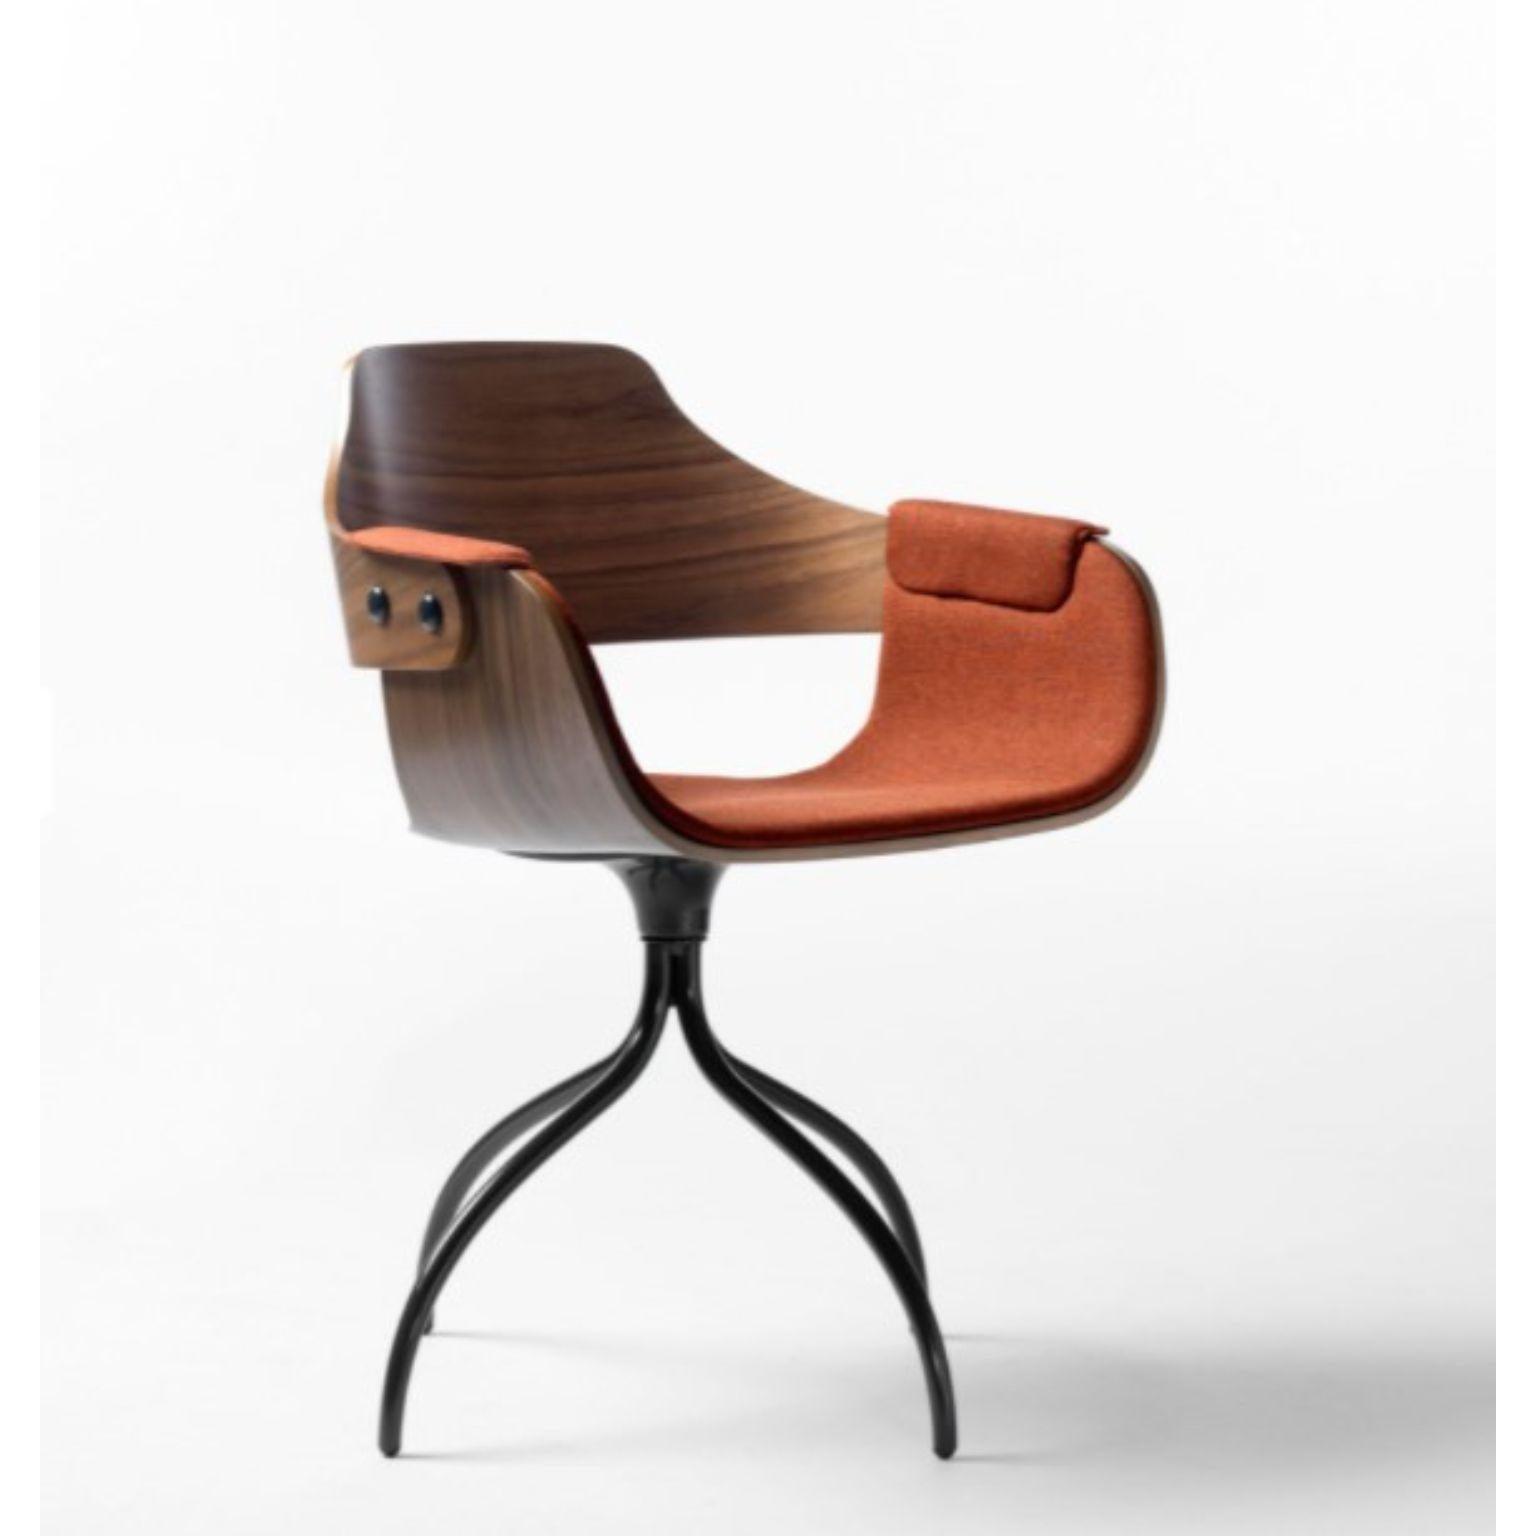 Swivel base showtime orange chair by Jaime Hayon.
Dimensions: D 55 x W 55 x H 79 cm.
Materials: Powder-coated steel or aluminum structure. Legs, seat, and backrest in plywood with exteriors in natural ash, walnut, or ash stained black. Metallic